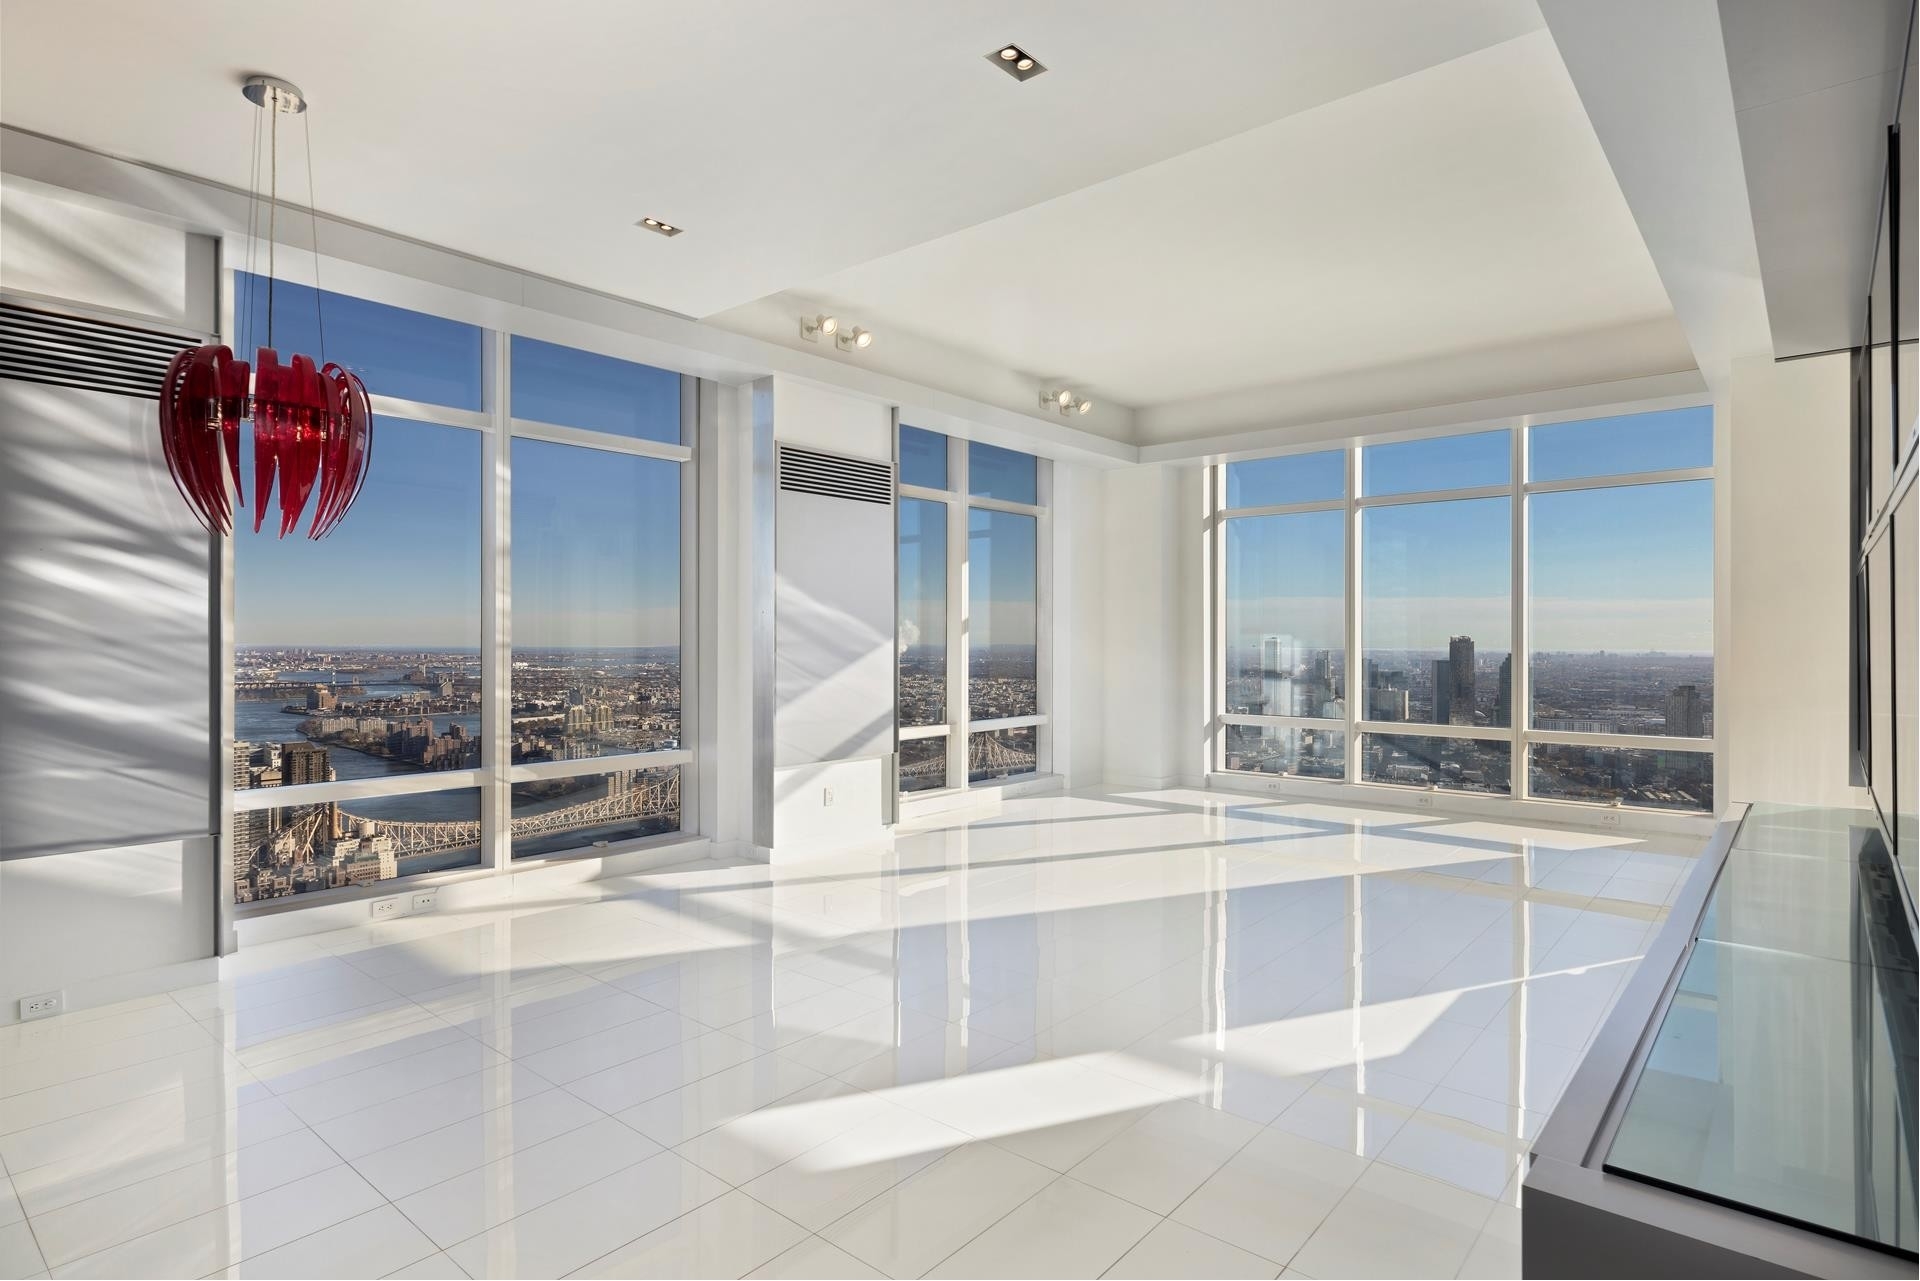 3. Condominiums for Sale at Trump World Tower, 845 UNITED NATIONS PLZ, 82A Turtle Bay, New York, New York 10017